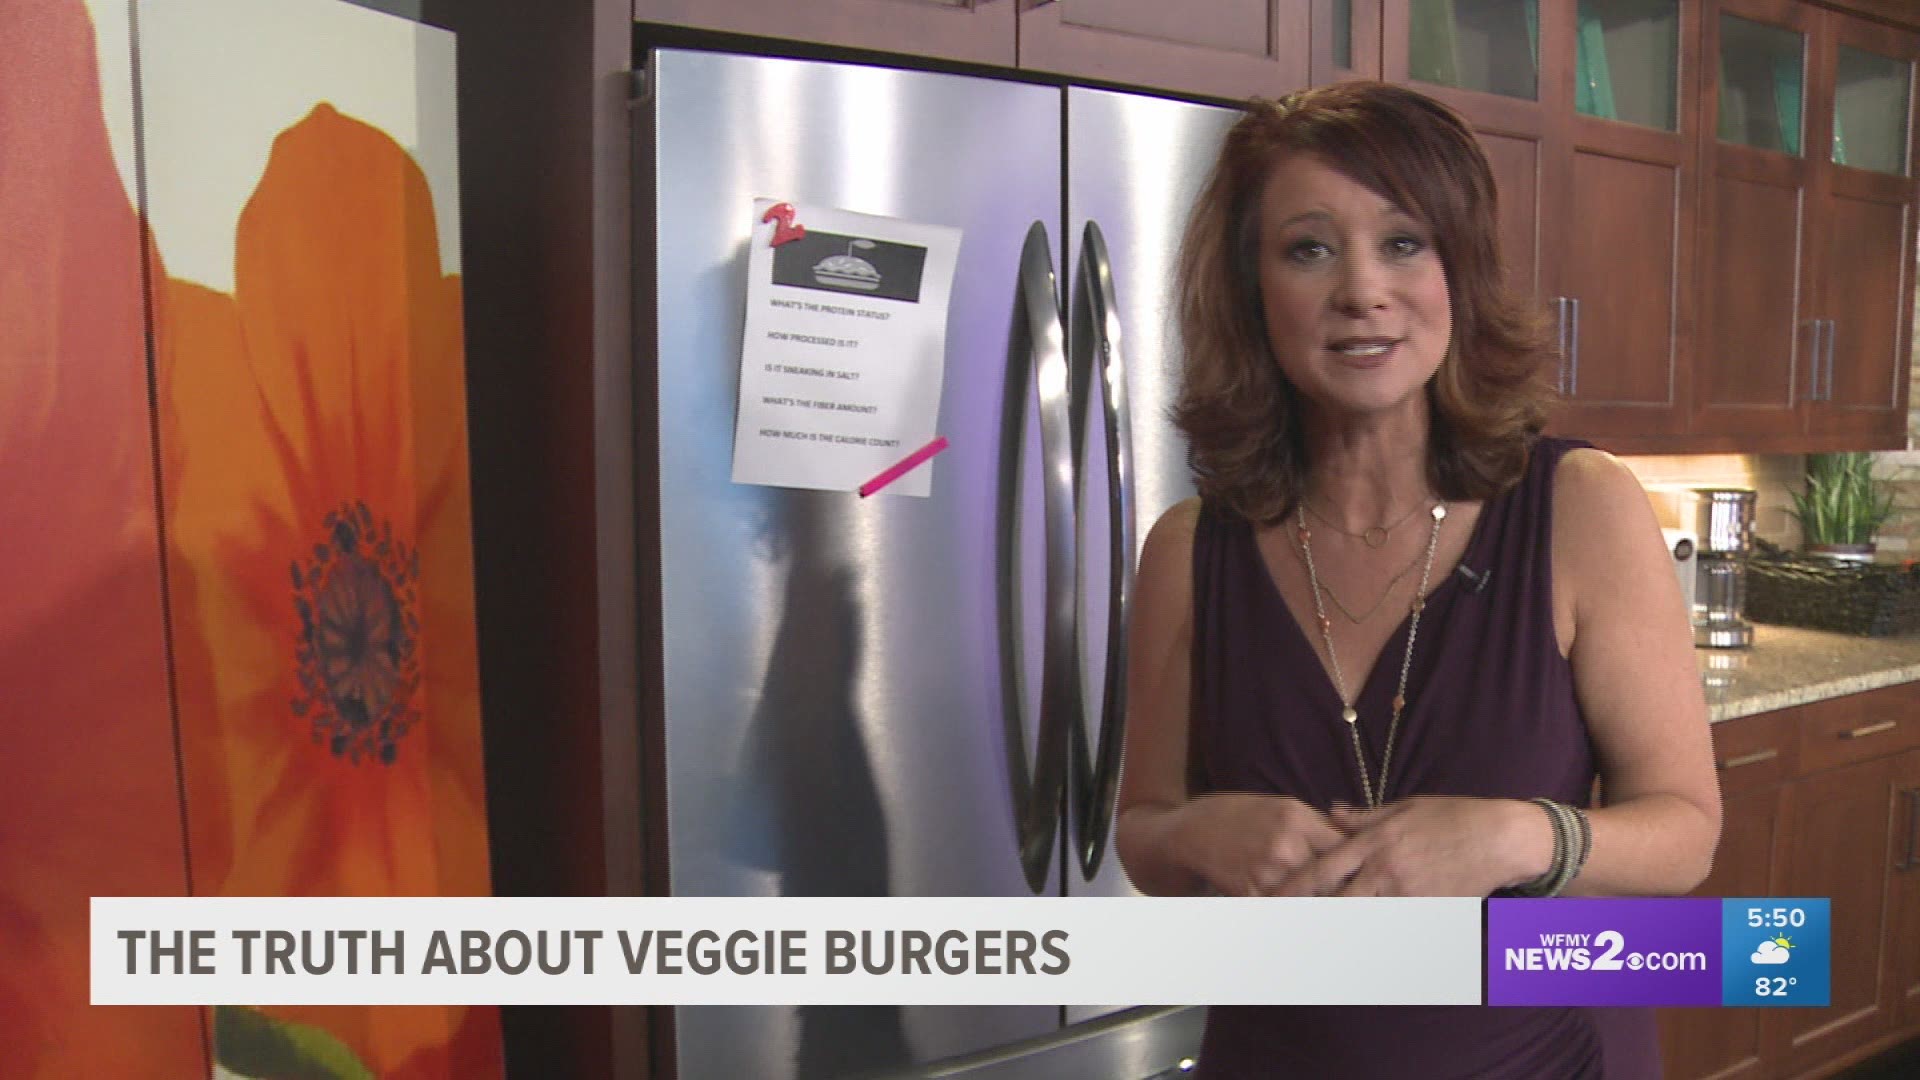 Just because it says "veggie burger" doesn't mean it's actually full of veggies.